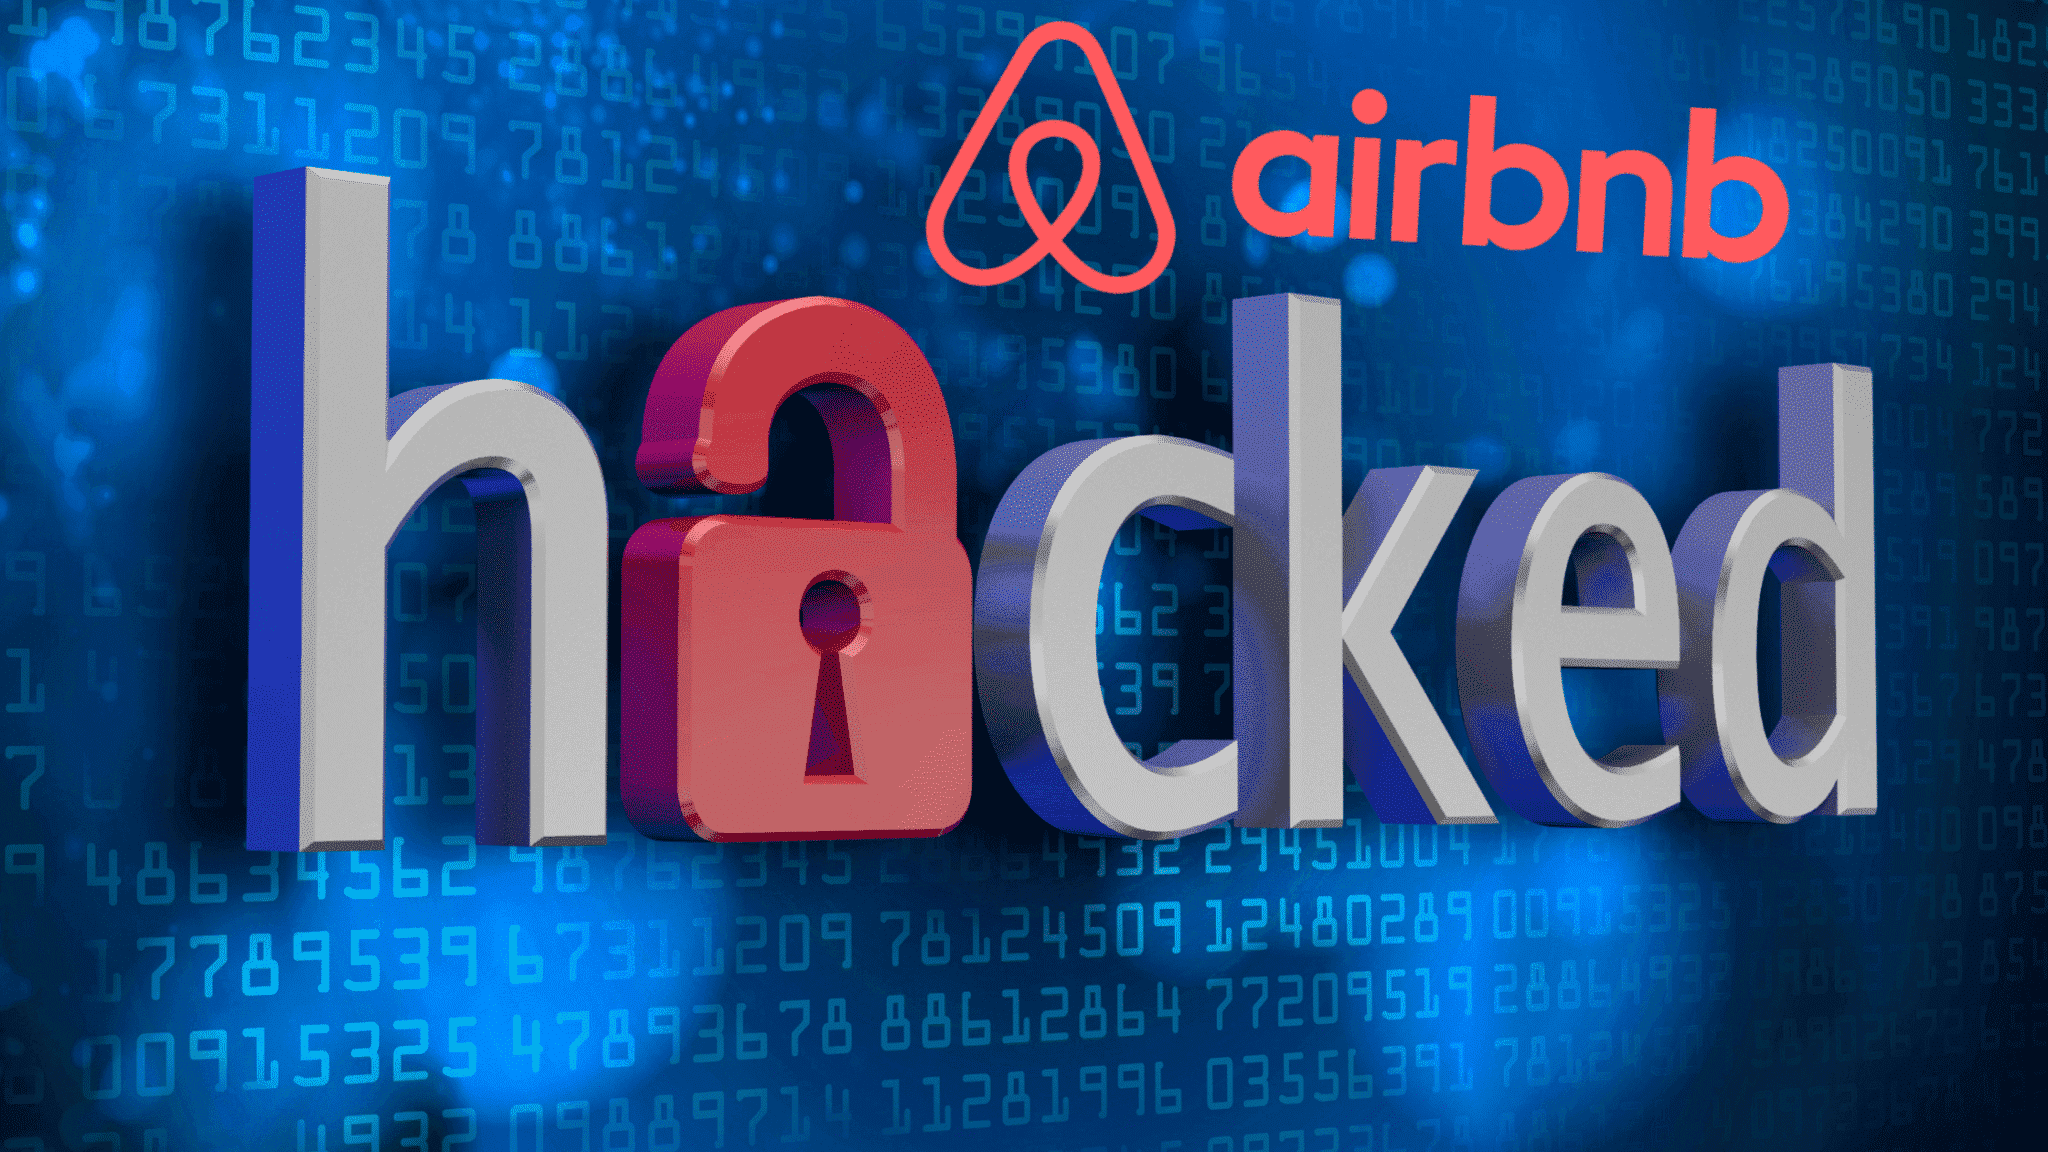 Airbnb account hacked